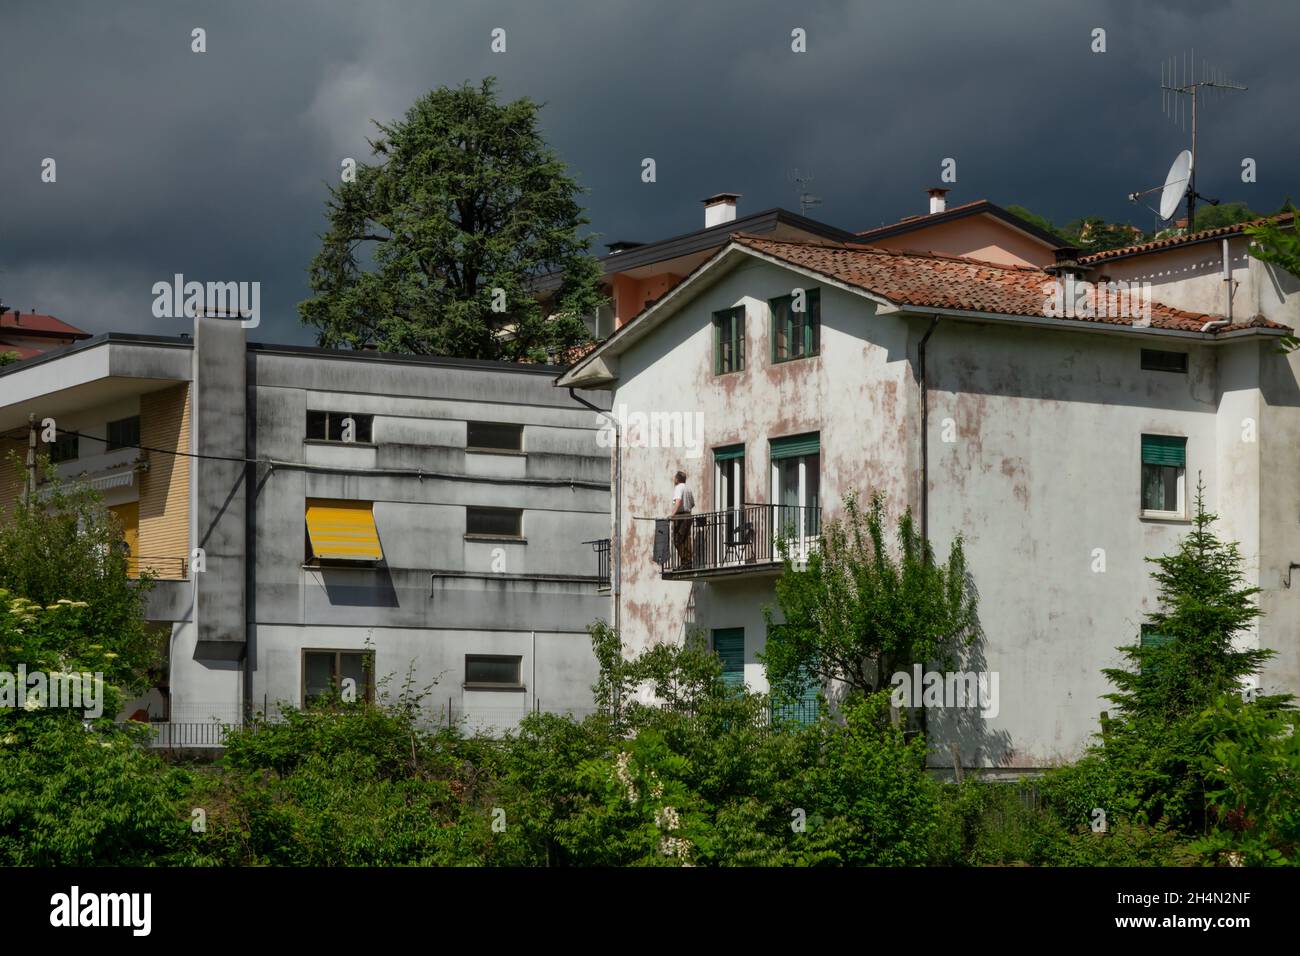 14 may 2021, Valdagno, Italy: man watching the storm coming from the balcony of the house Stock Photo